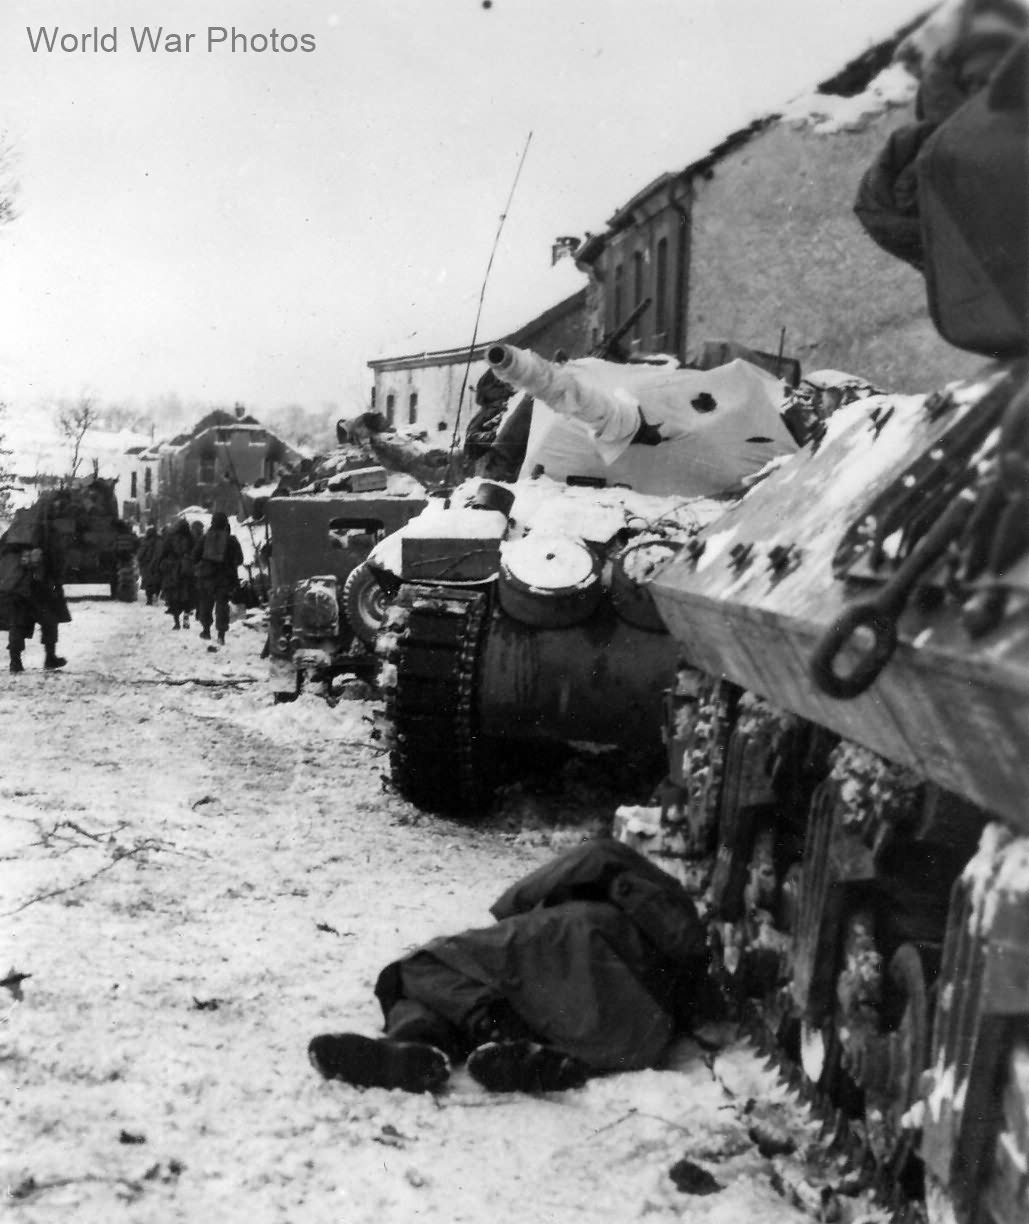 Battle of the Bulge – Killed Colonel by his M10